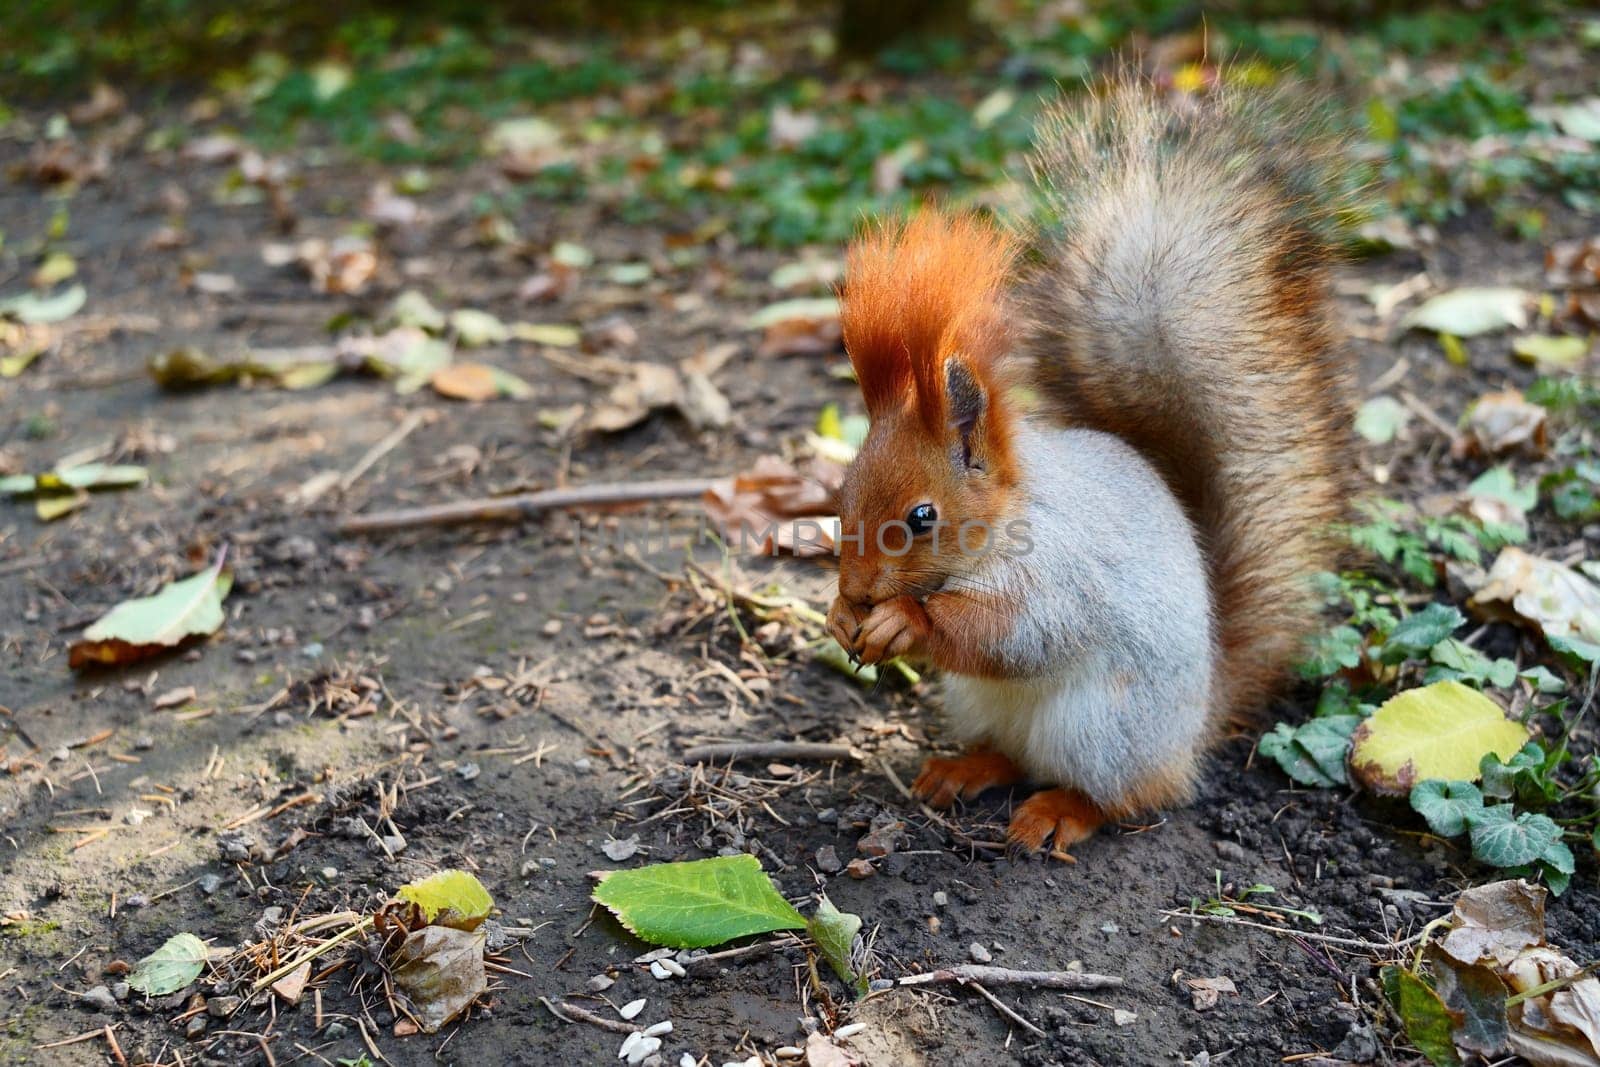 A gray red squirrel on the ground among the leaves eats a nut. High quality photo